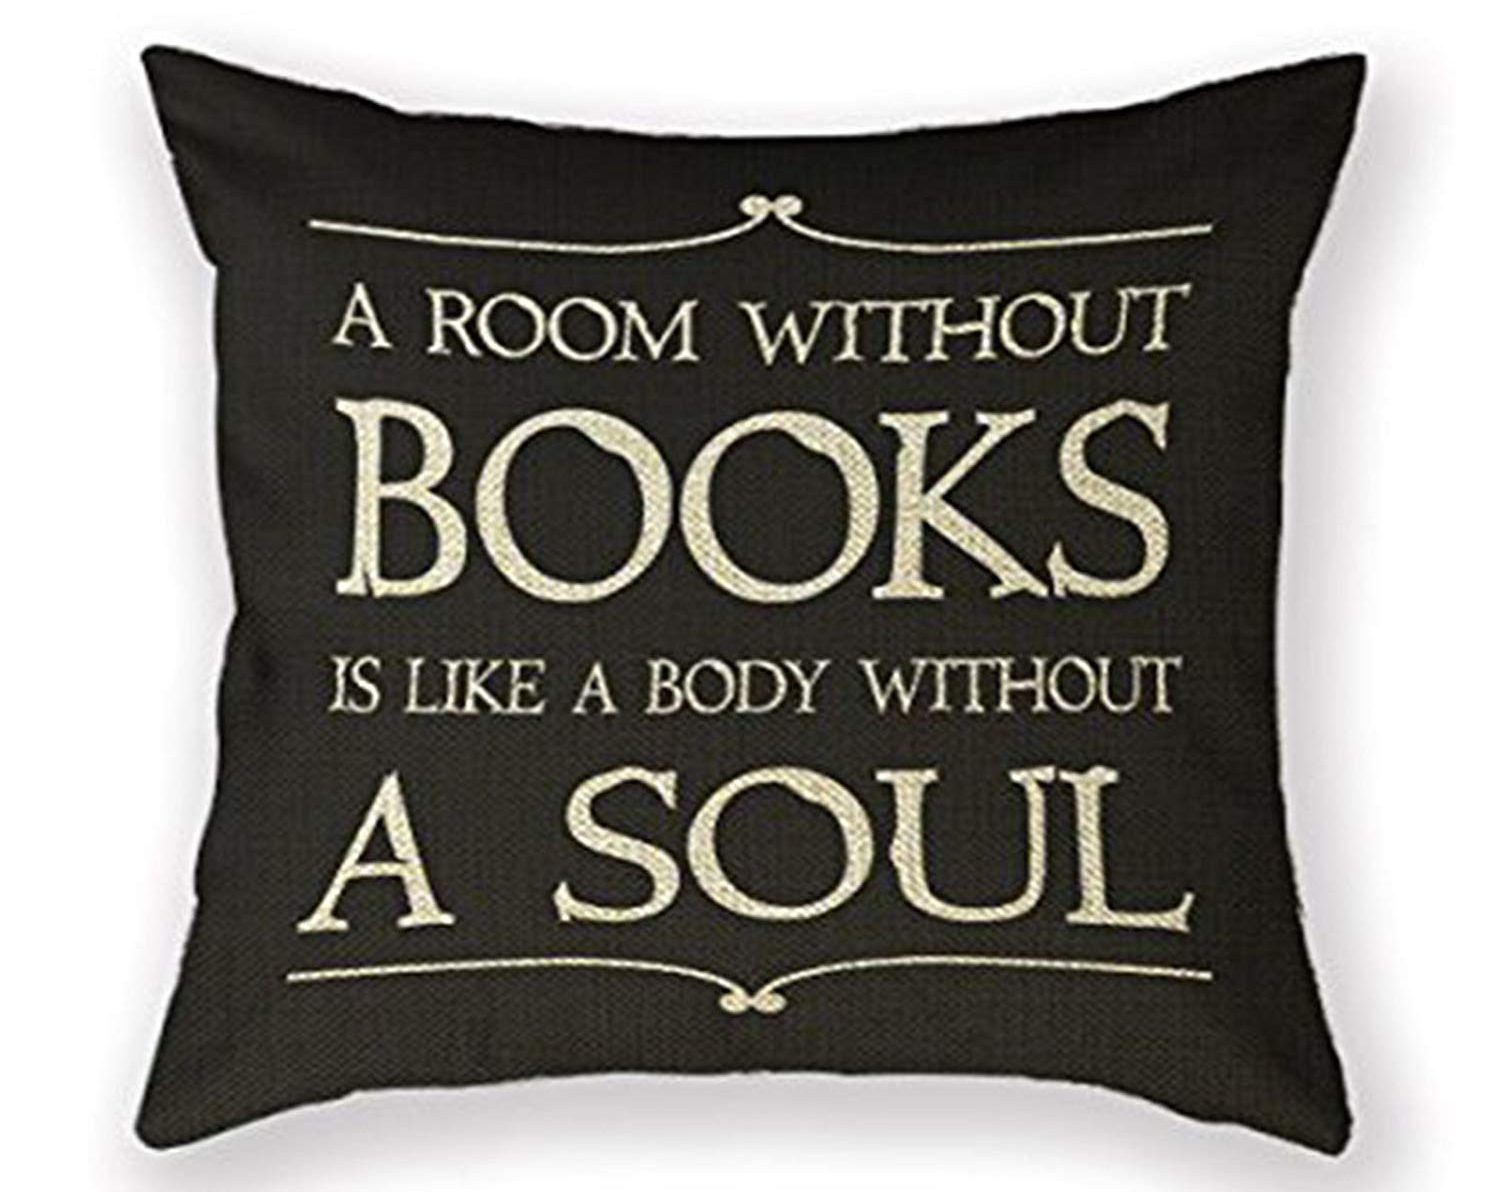 Book Lovers’ Pillow Case Only $1.77 SHIPPED!